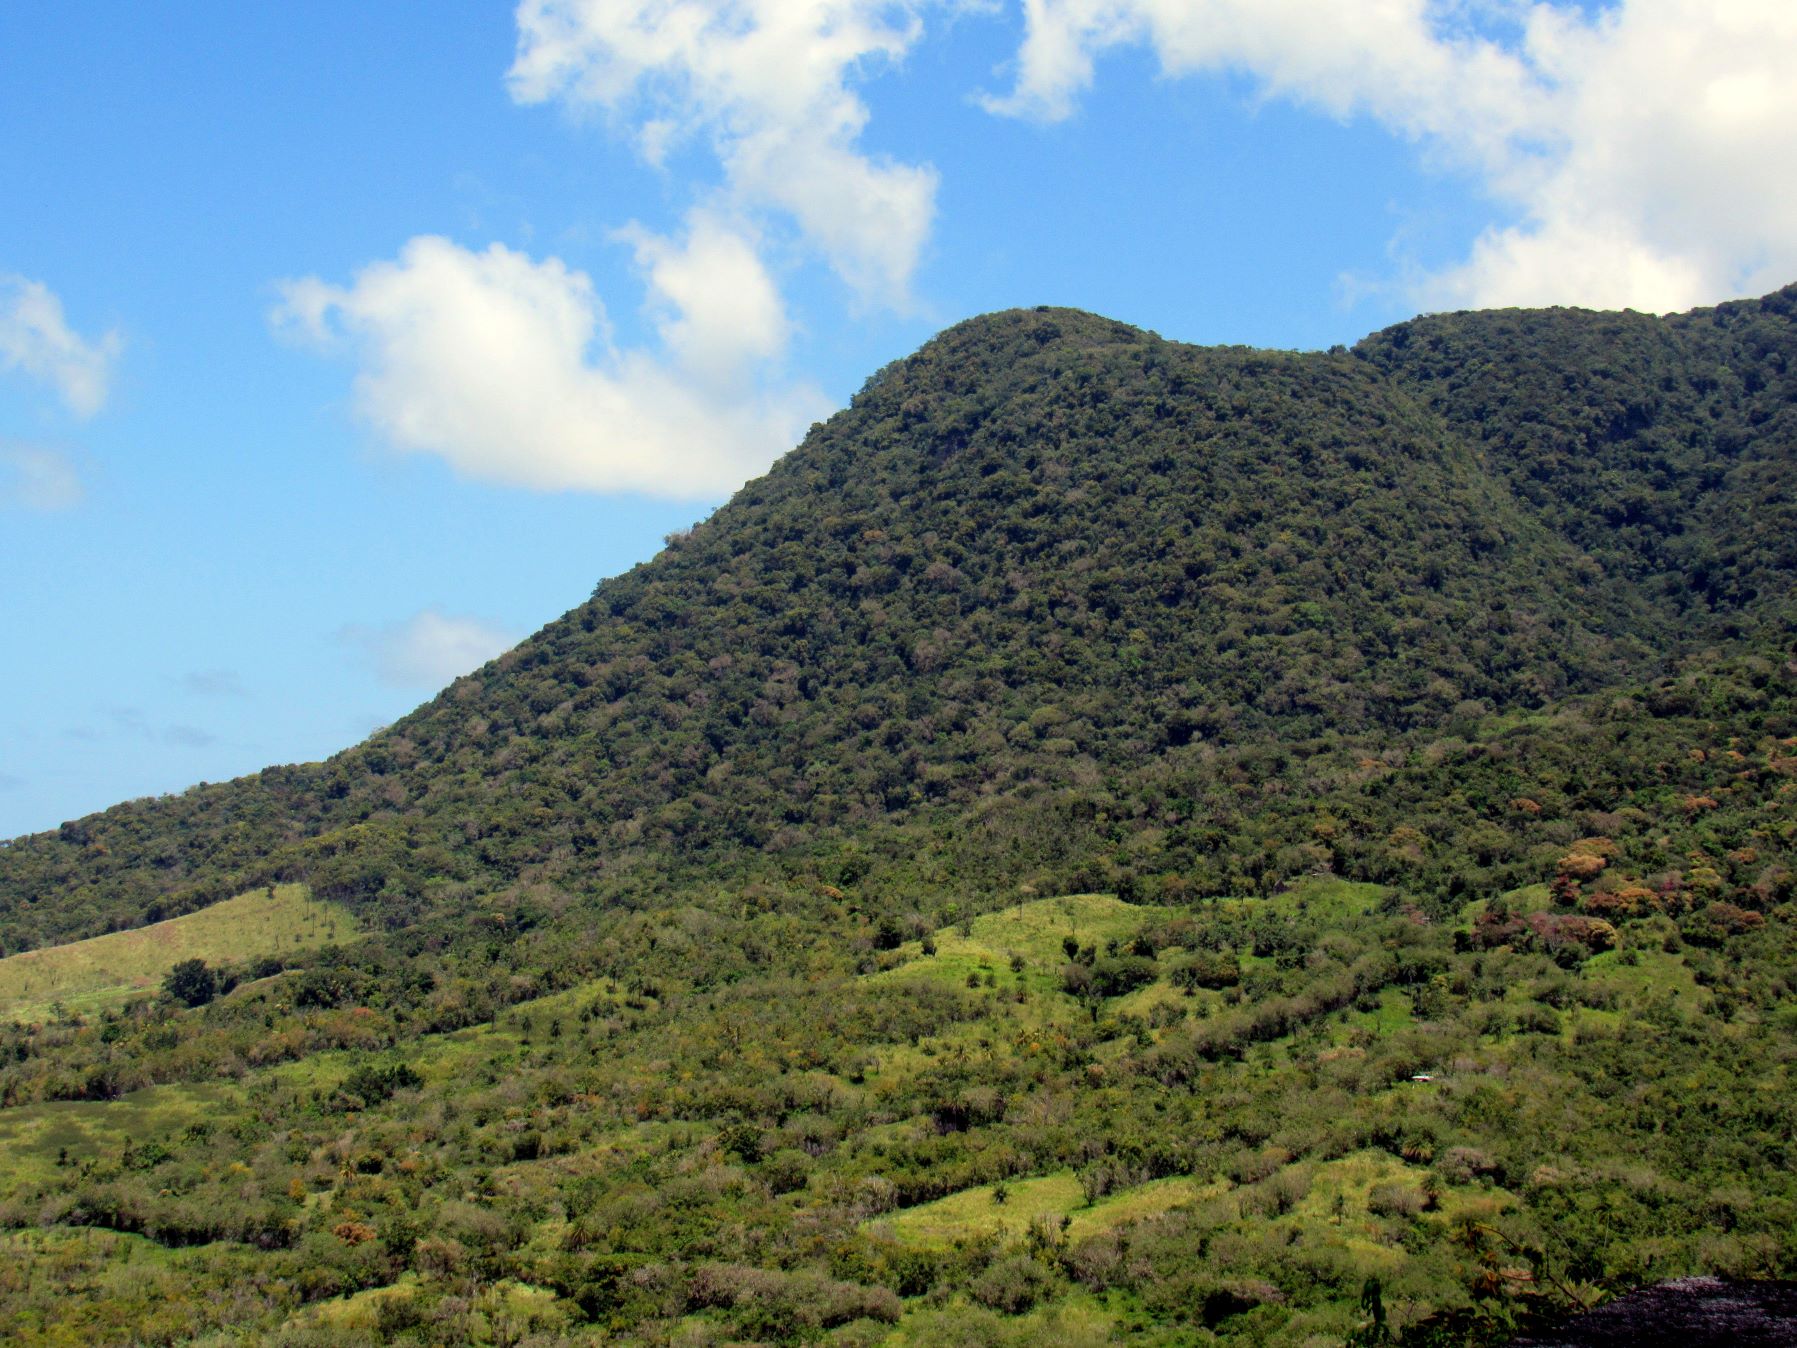 The Central Forest Reserve National Park